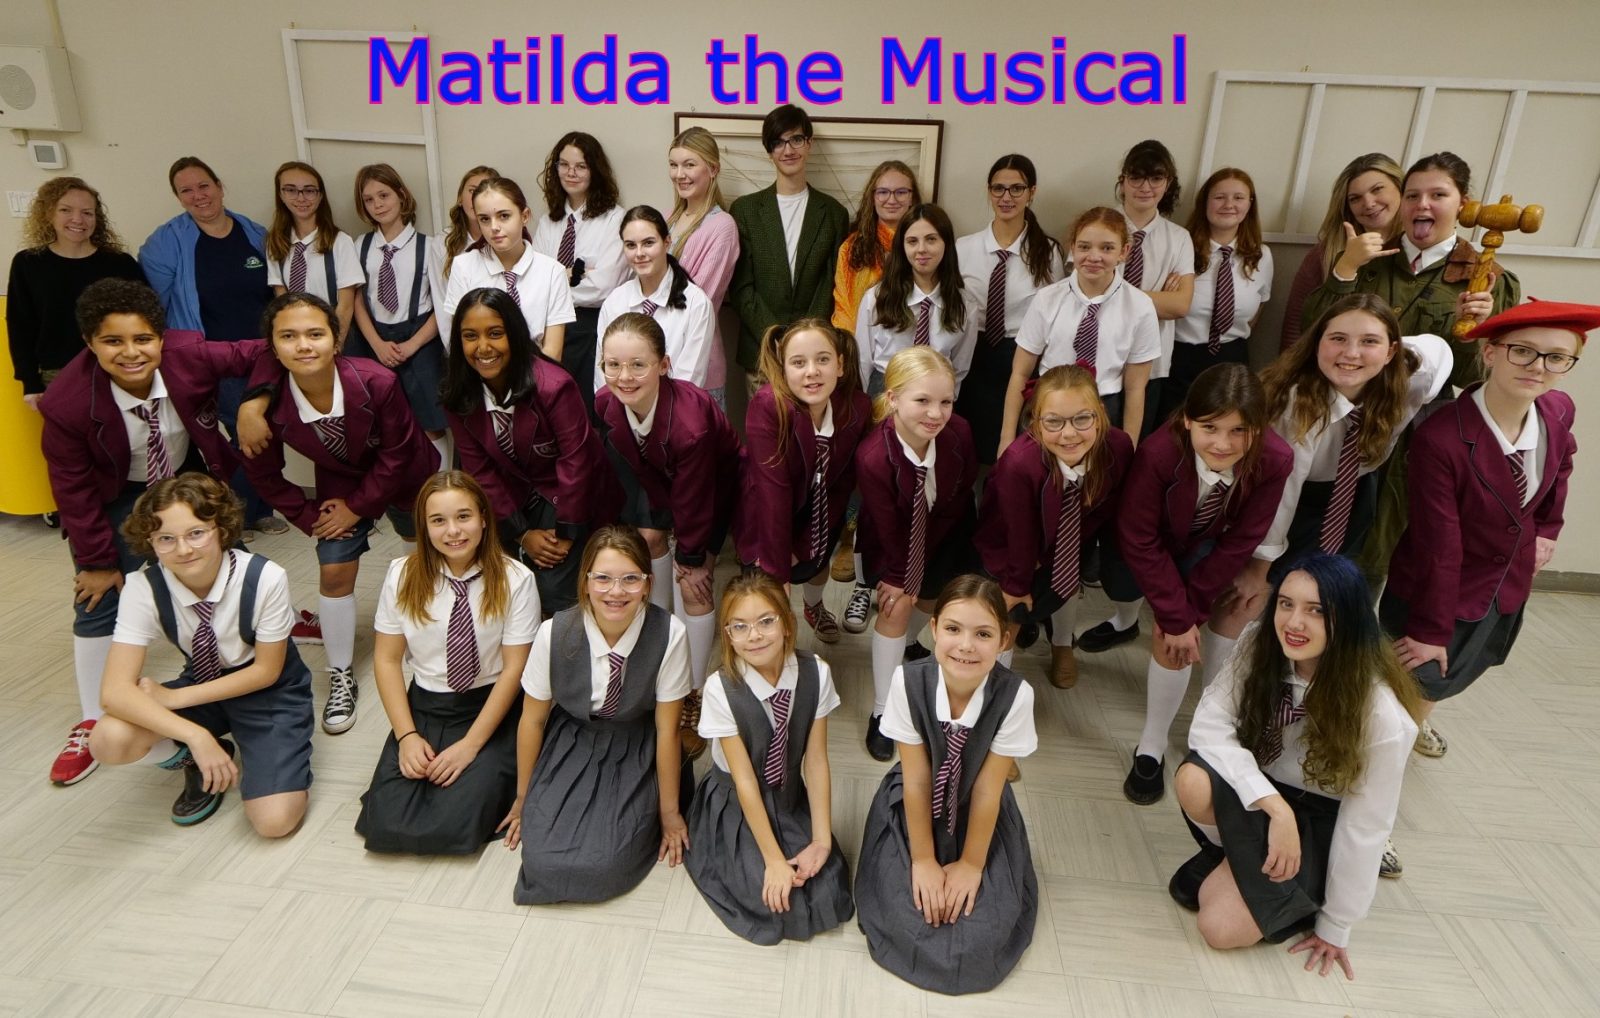 Matilda jr. a show for the whole family